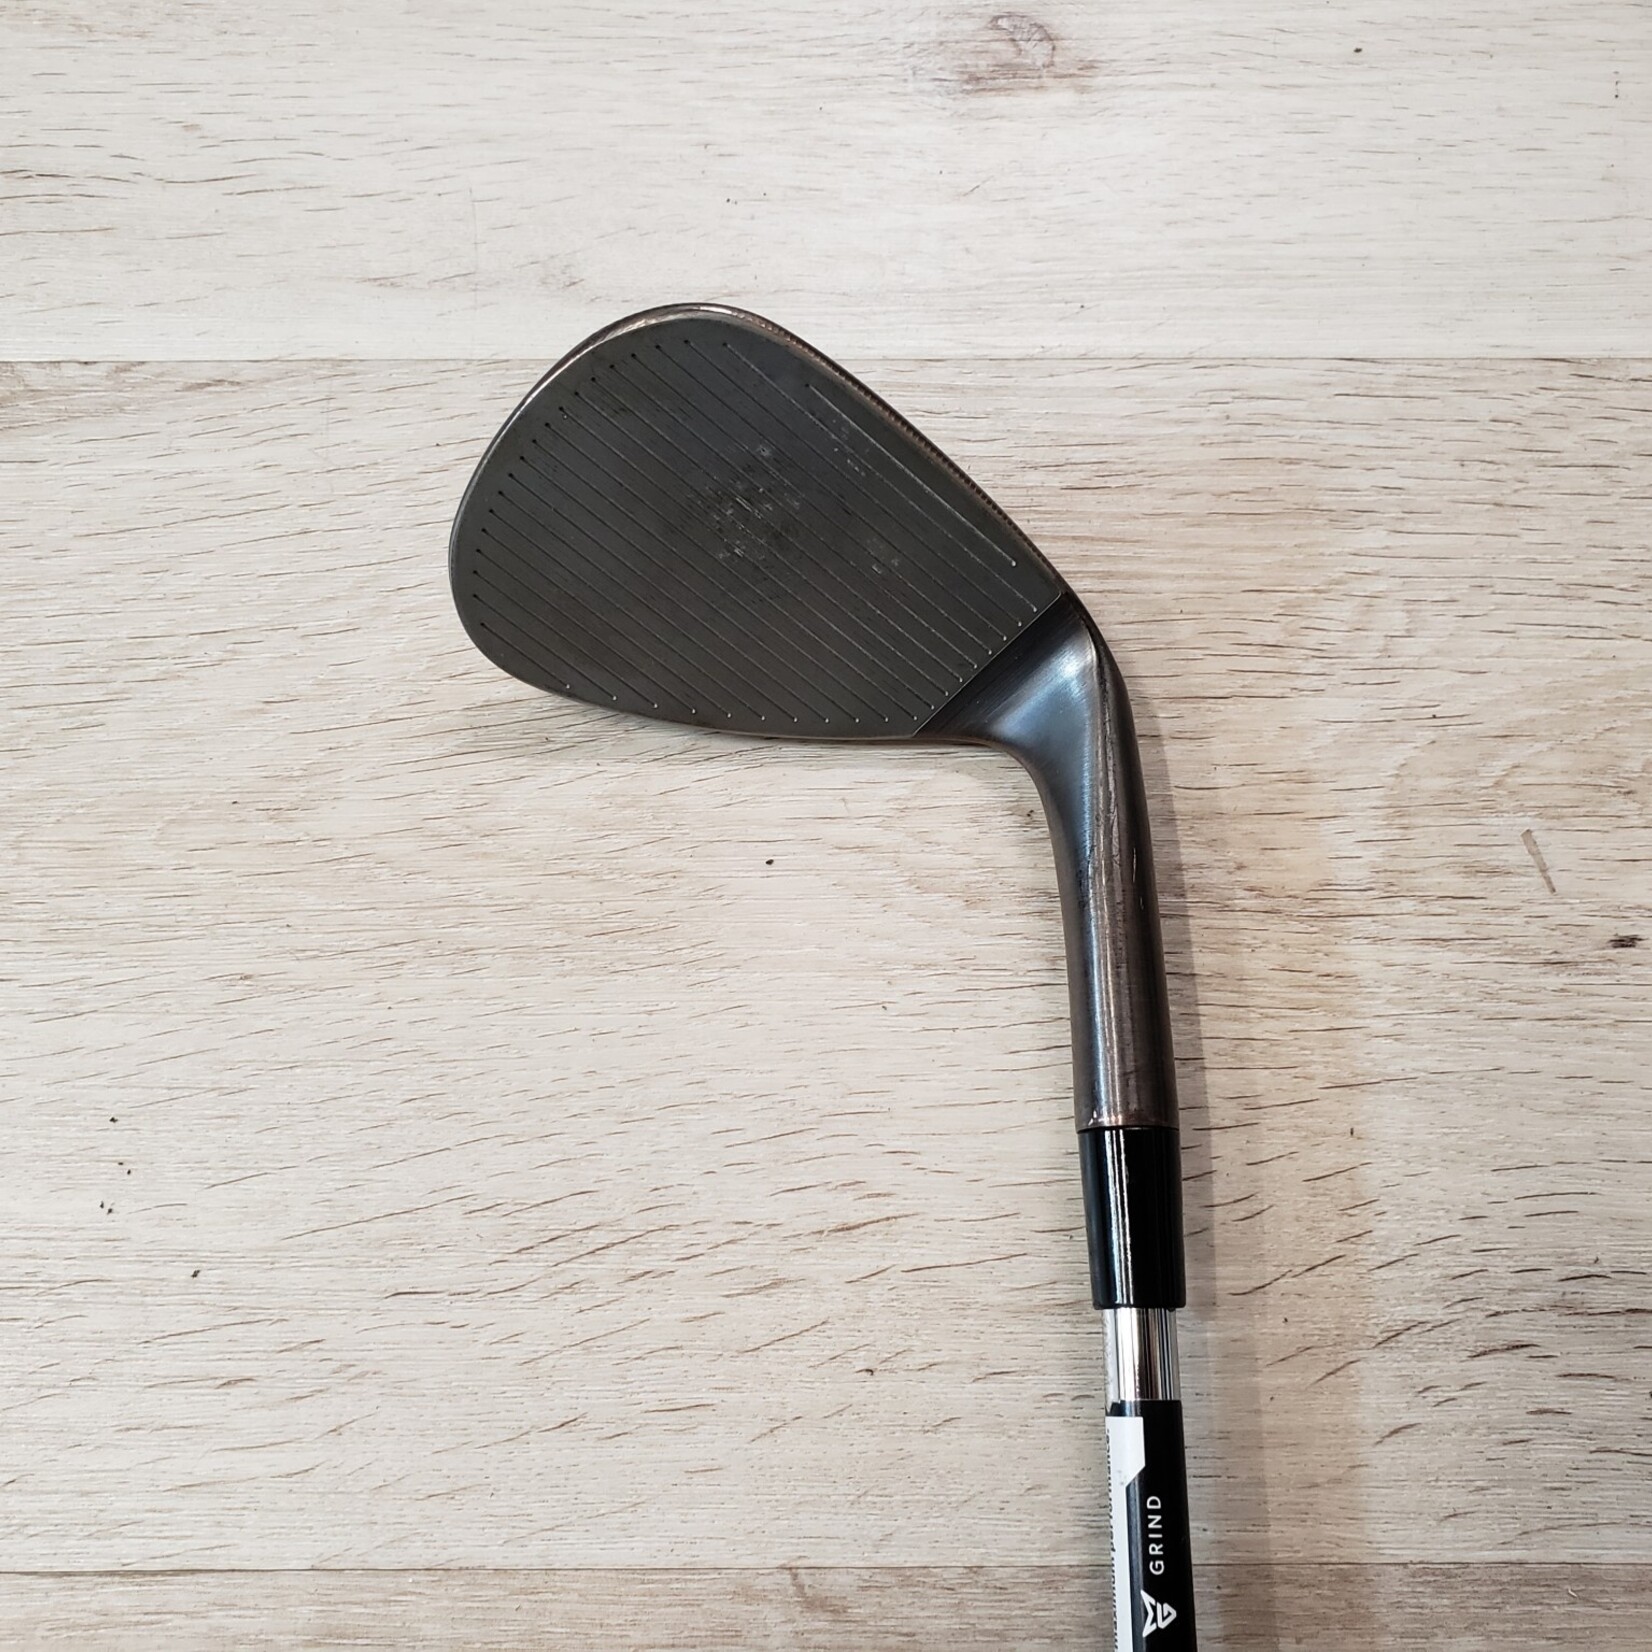 TaylorMade (Pre-owned) TaylorMade MG3 Hi-Toe Raw 58* 13 KBS Wedge (LH)